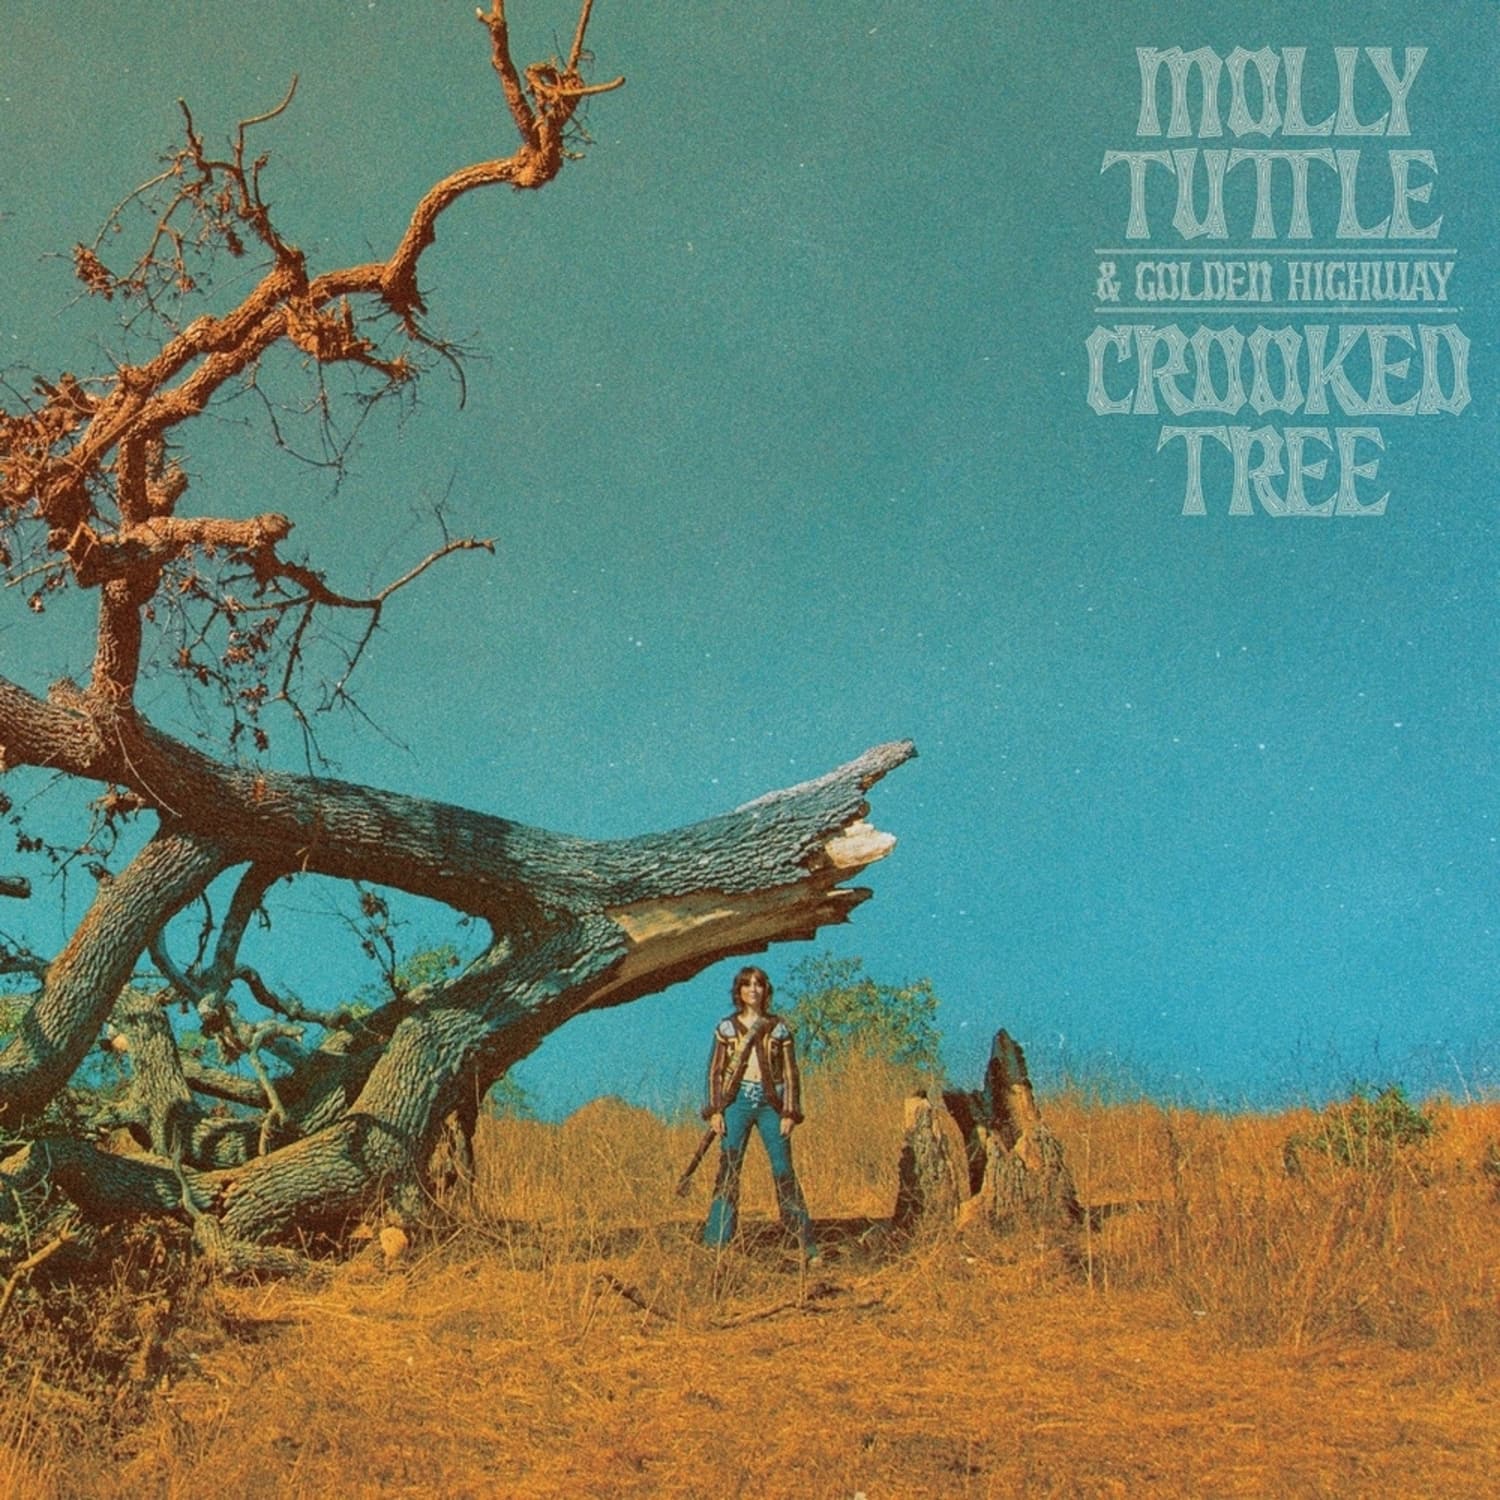 Molly Tuttle & Golden Highway - CROOKED TREE 